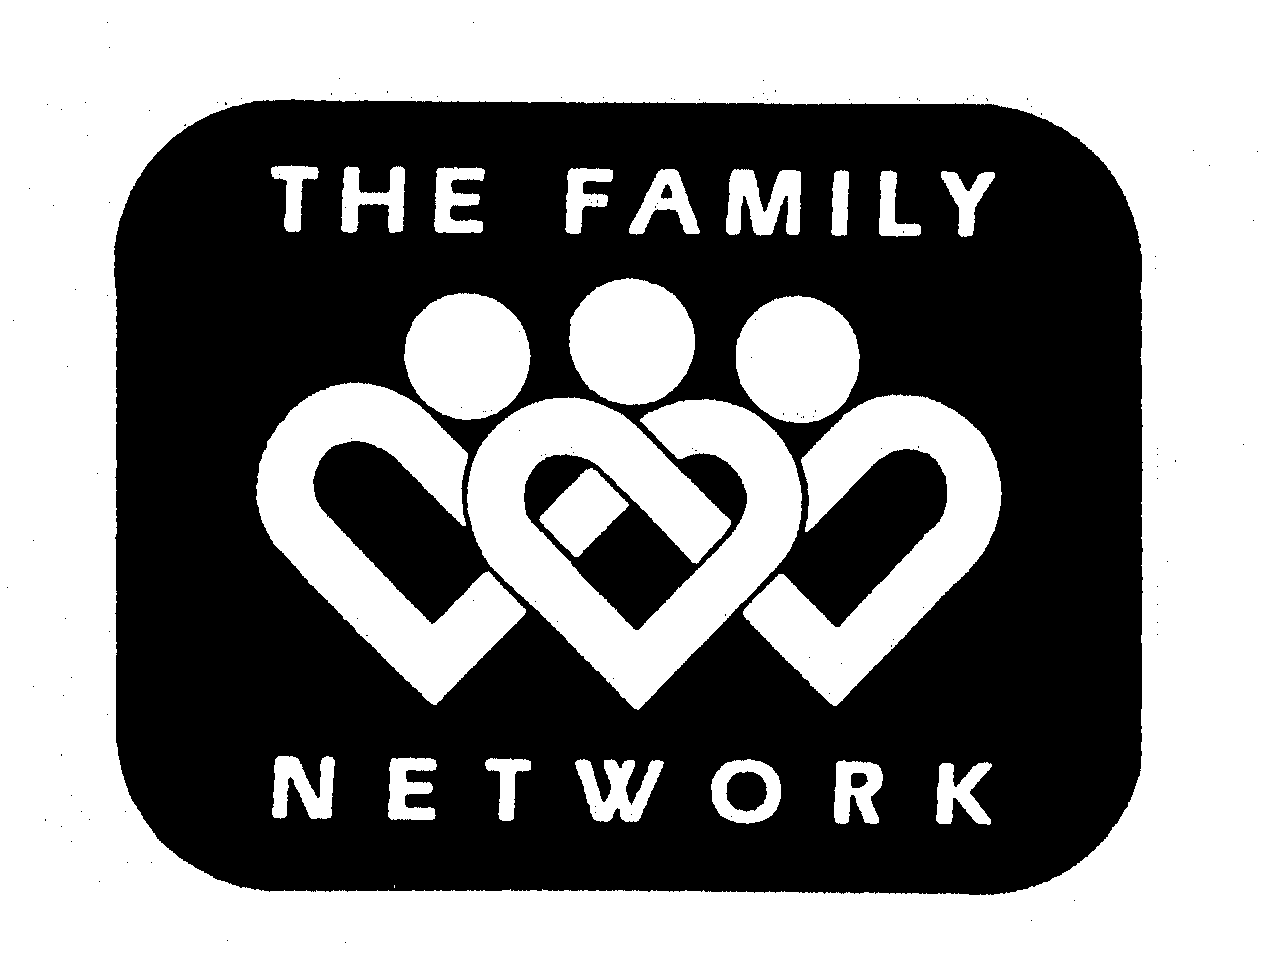 THE FAMILY NETWORK